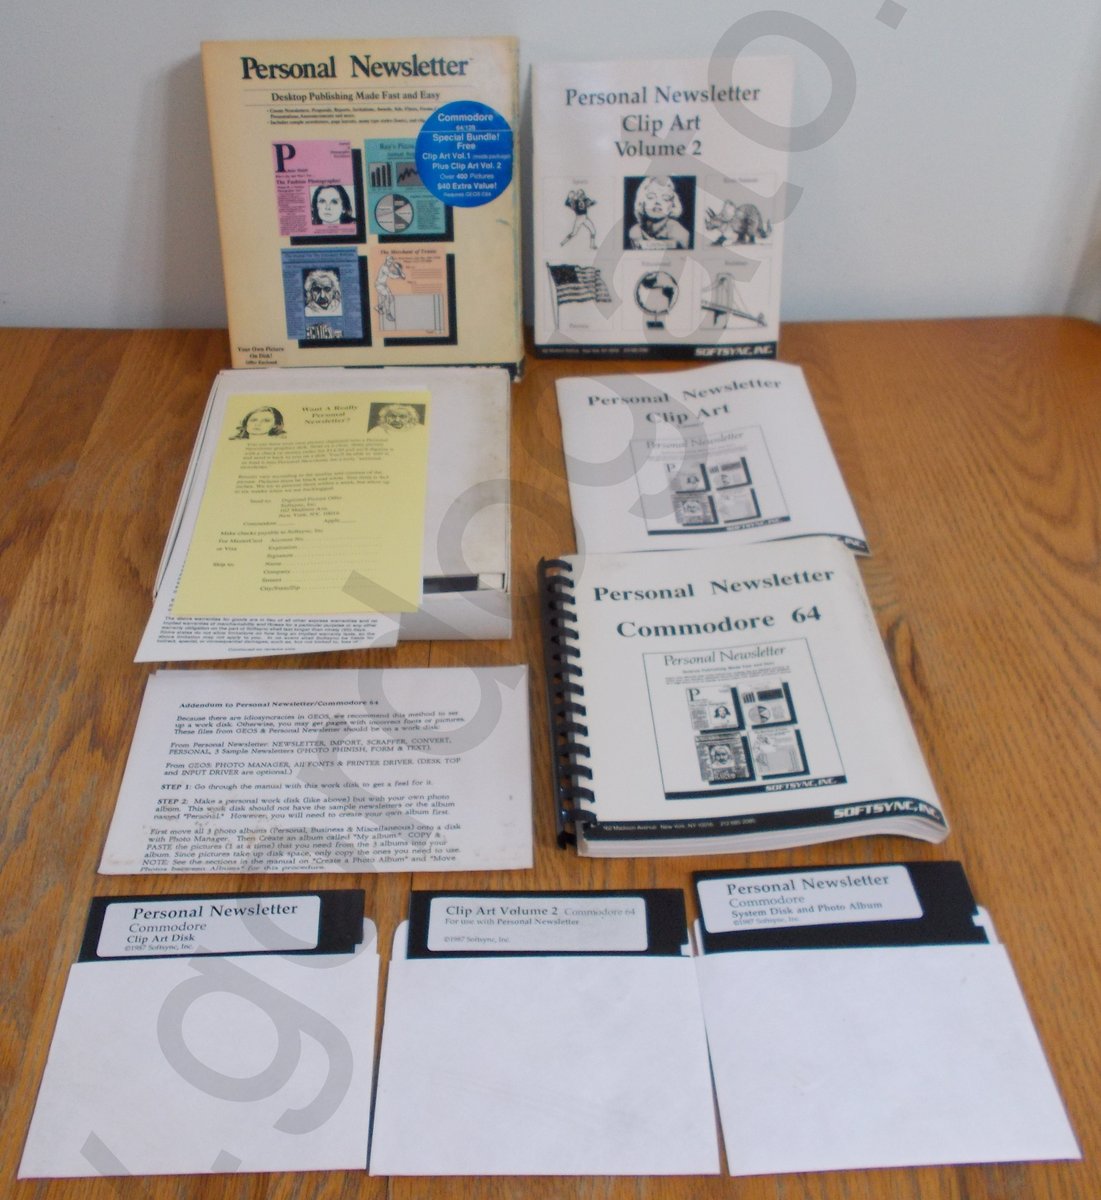 Personal Newsletter Desktop Publishing for Commodore 64/128 on F